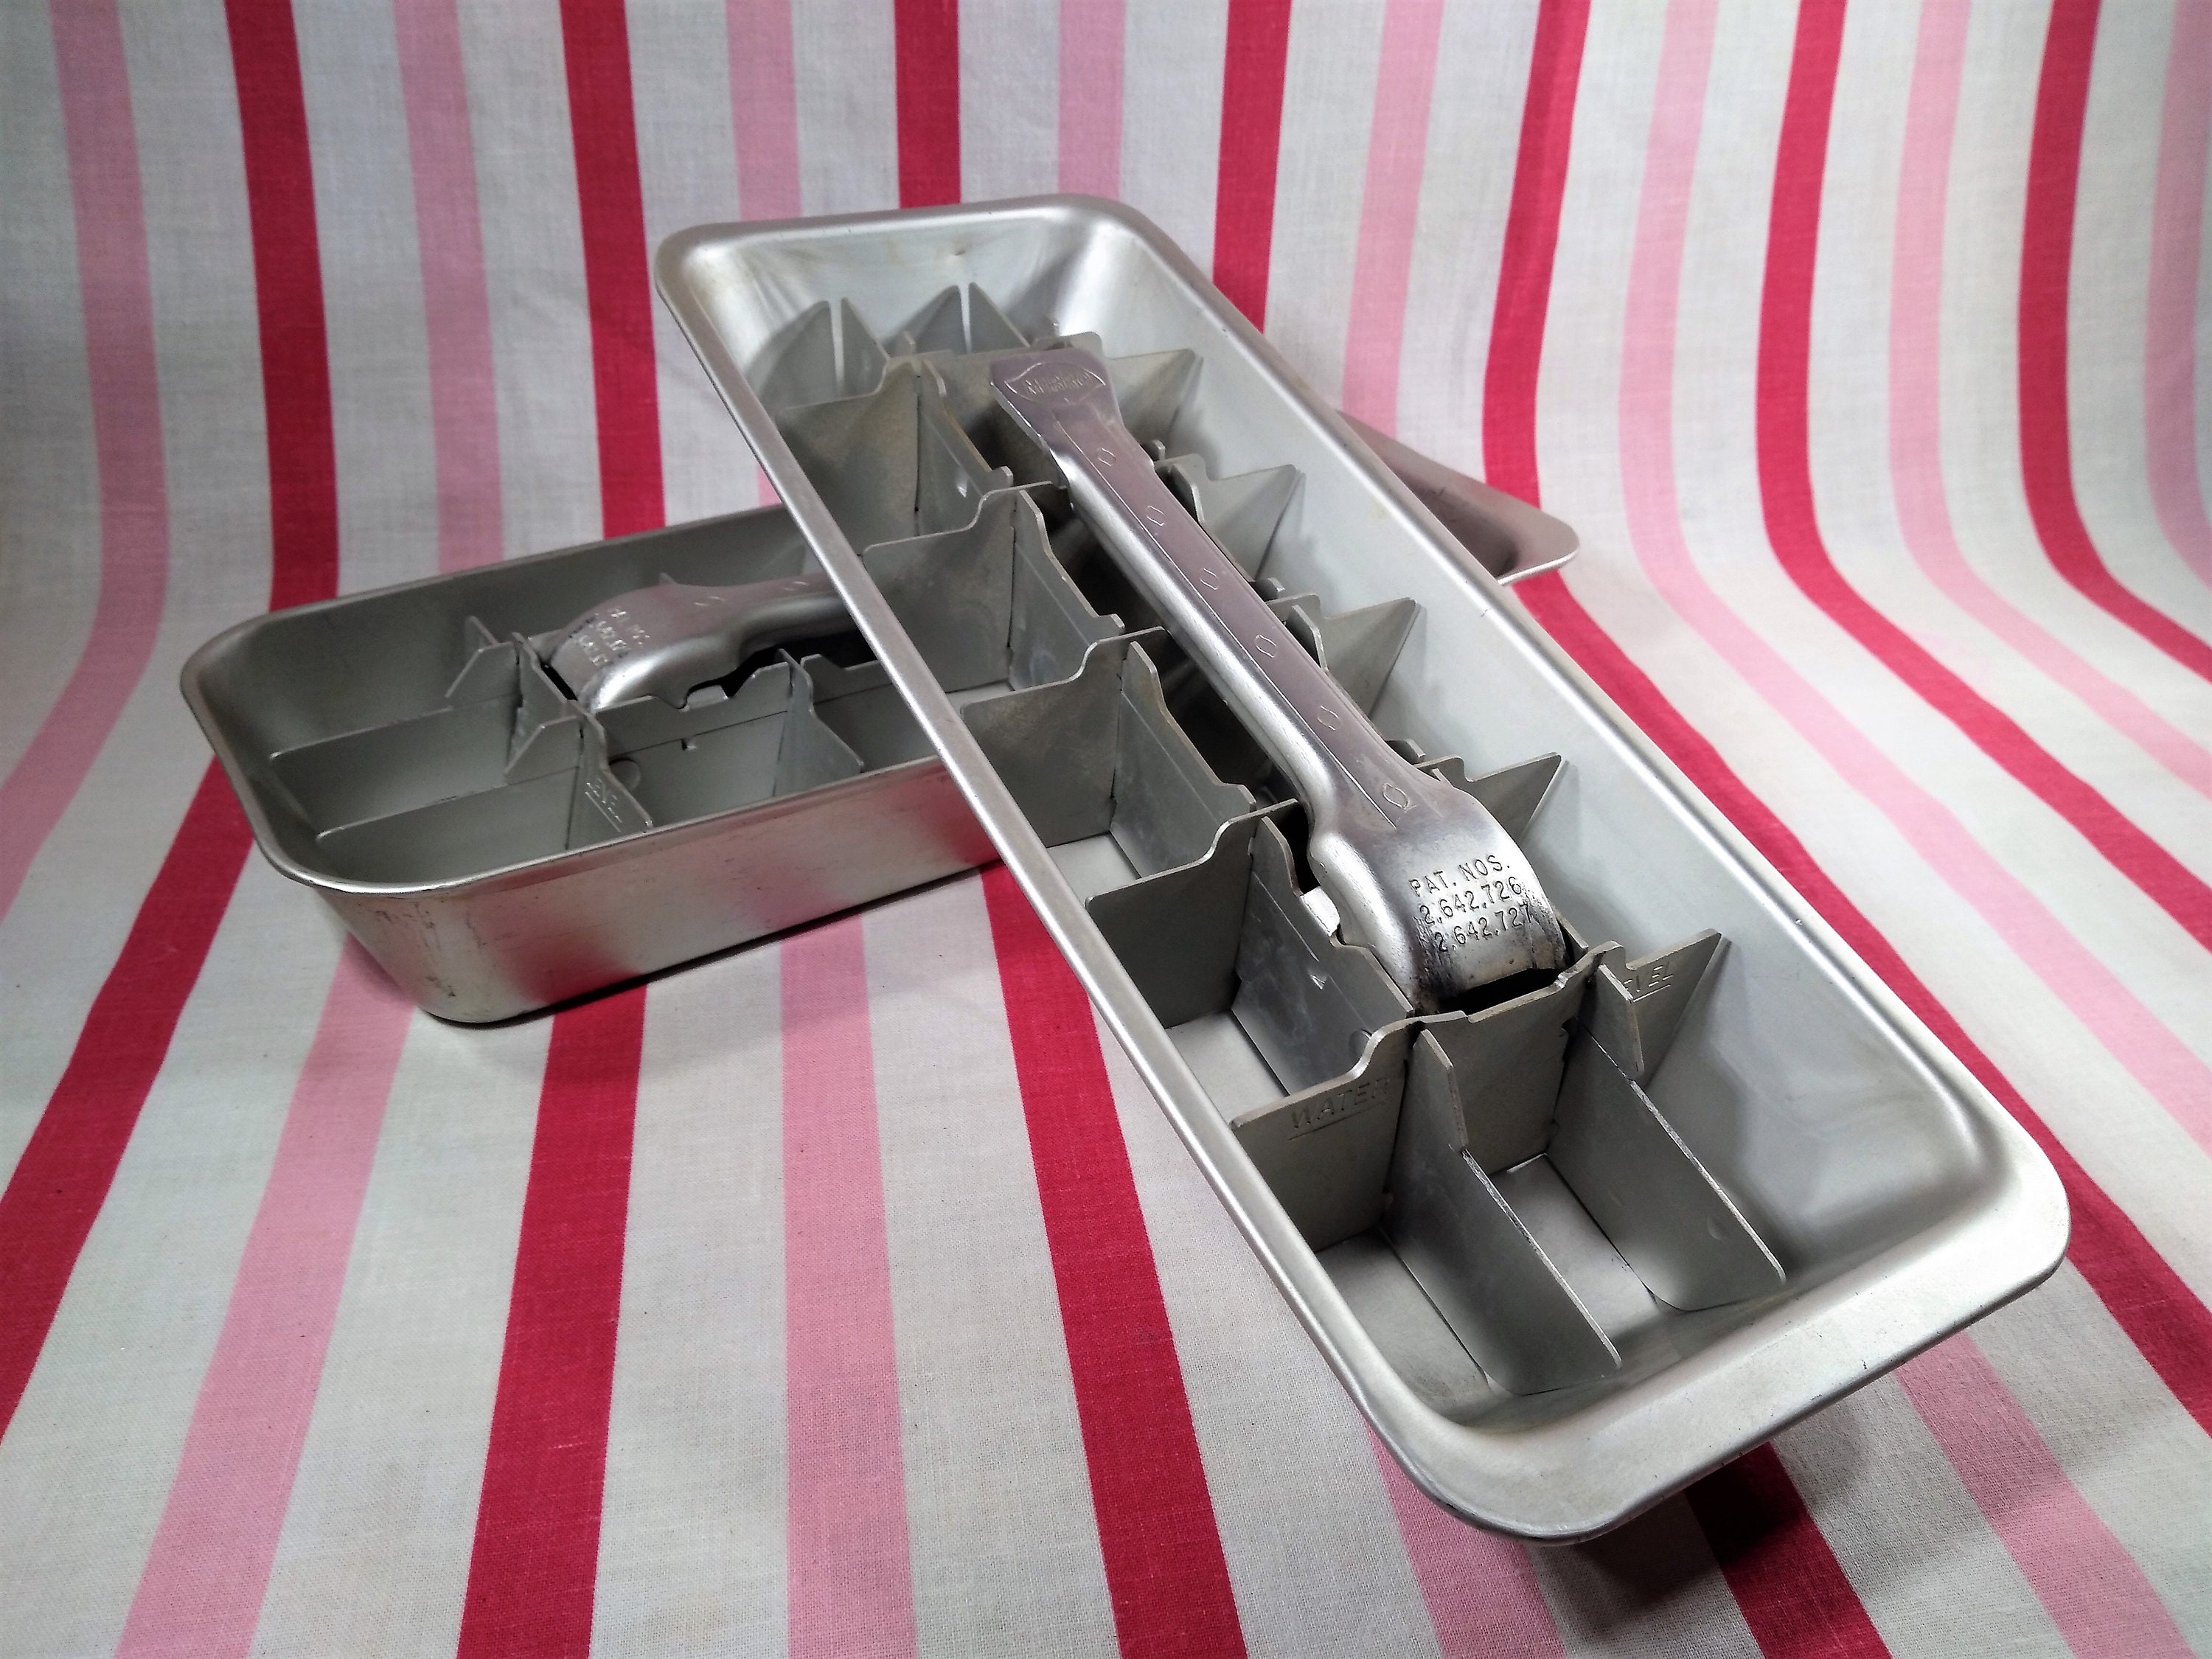 Vintage Metal Ice Trays Aluminum Cold Drinks Ice Cubes Kitchen 50s